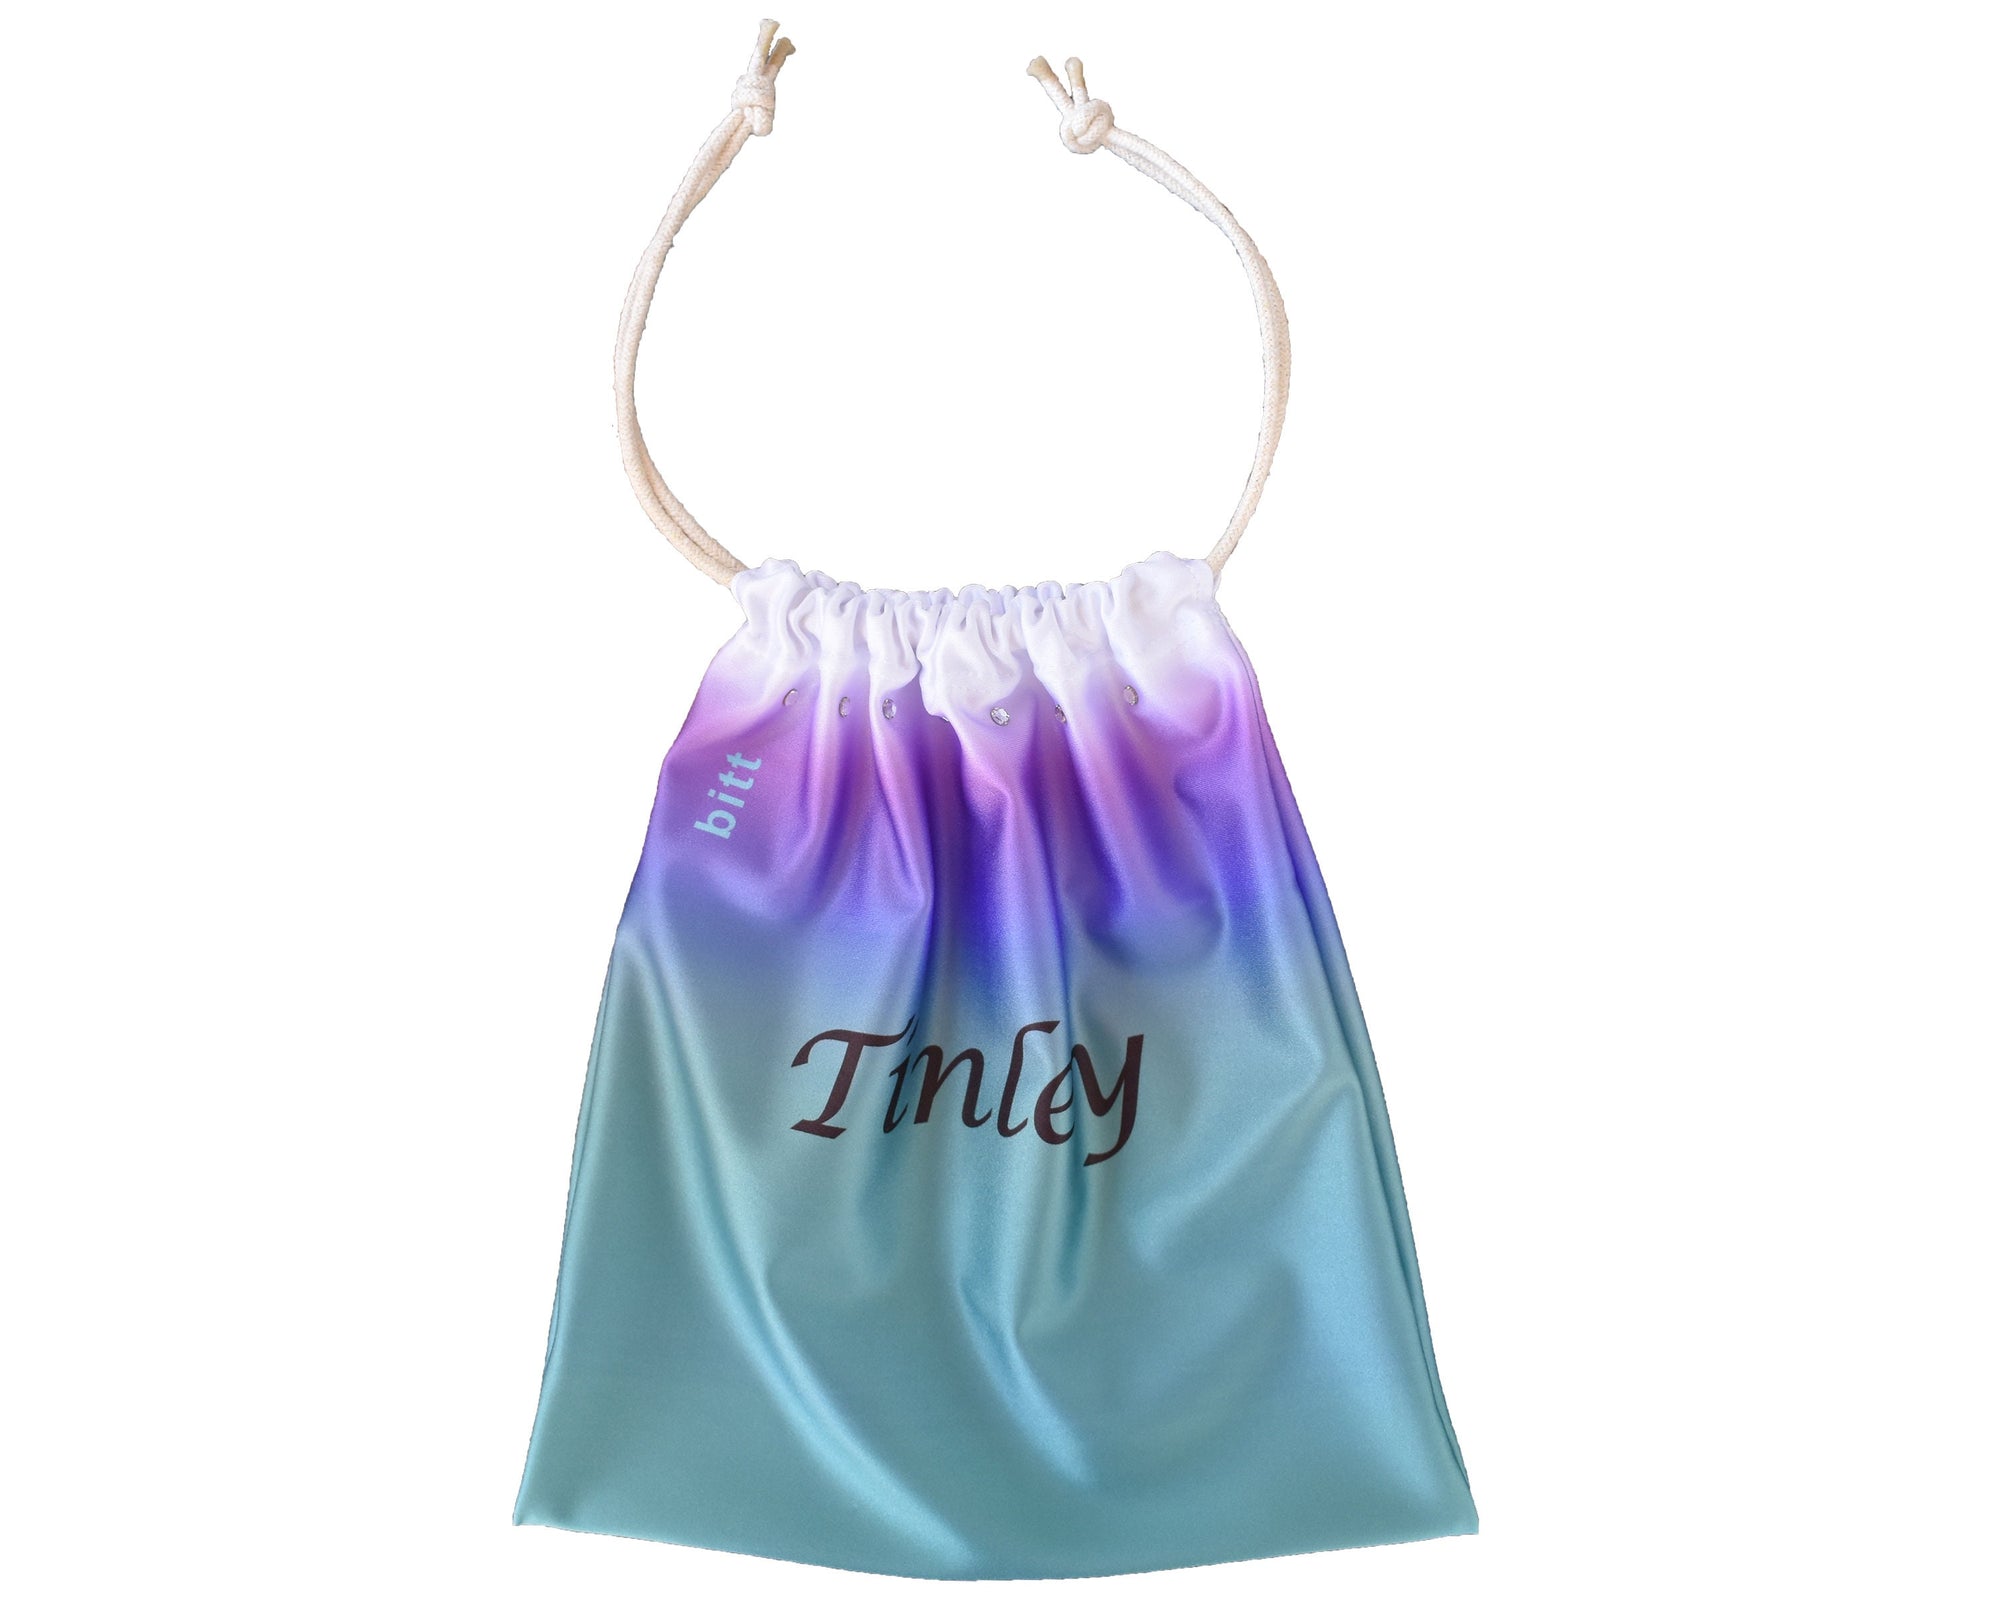 Personalized Gymnastics Grip Bag - Teal Purple and White Ombre